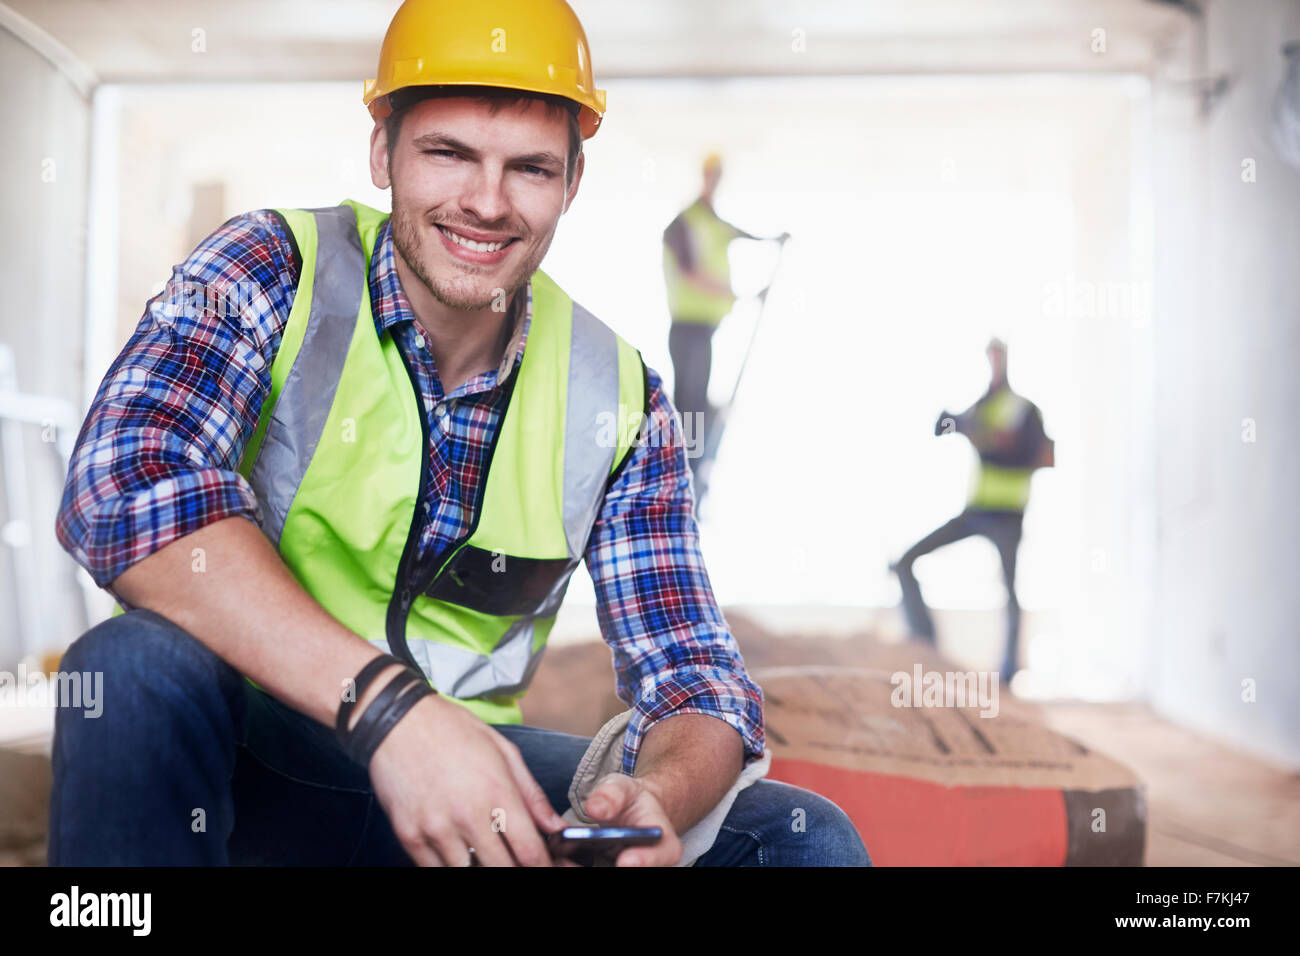 Construction Worker smiling woman with cell phone at construction site Banque D'Images